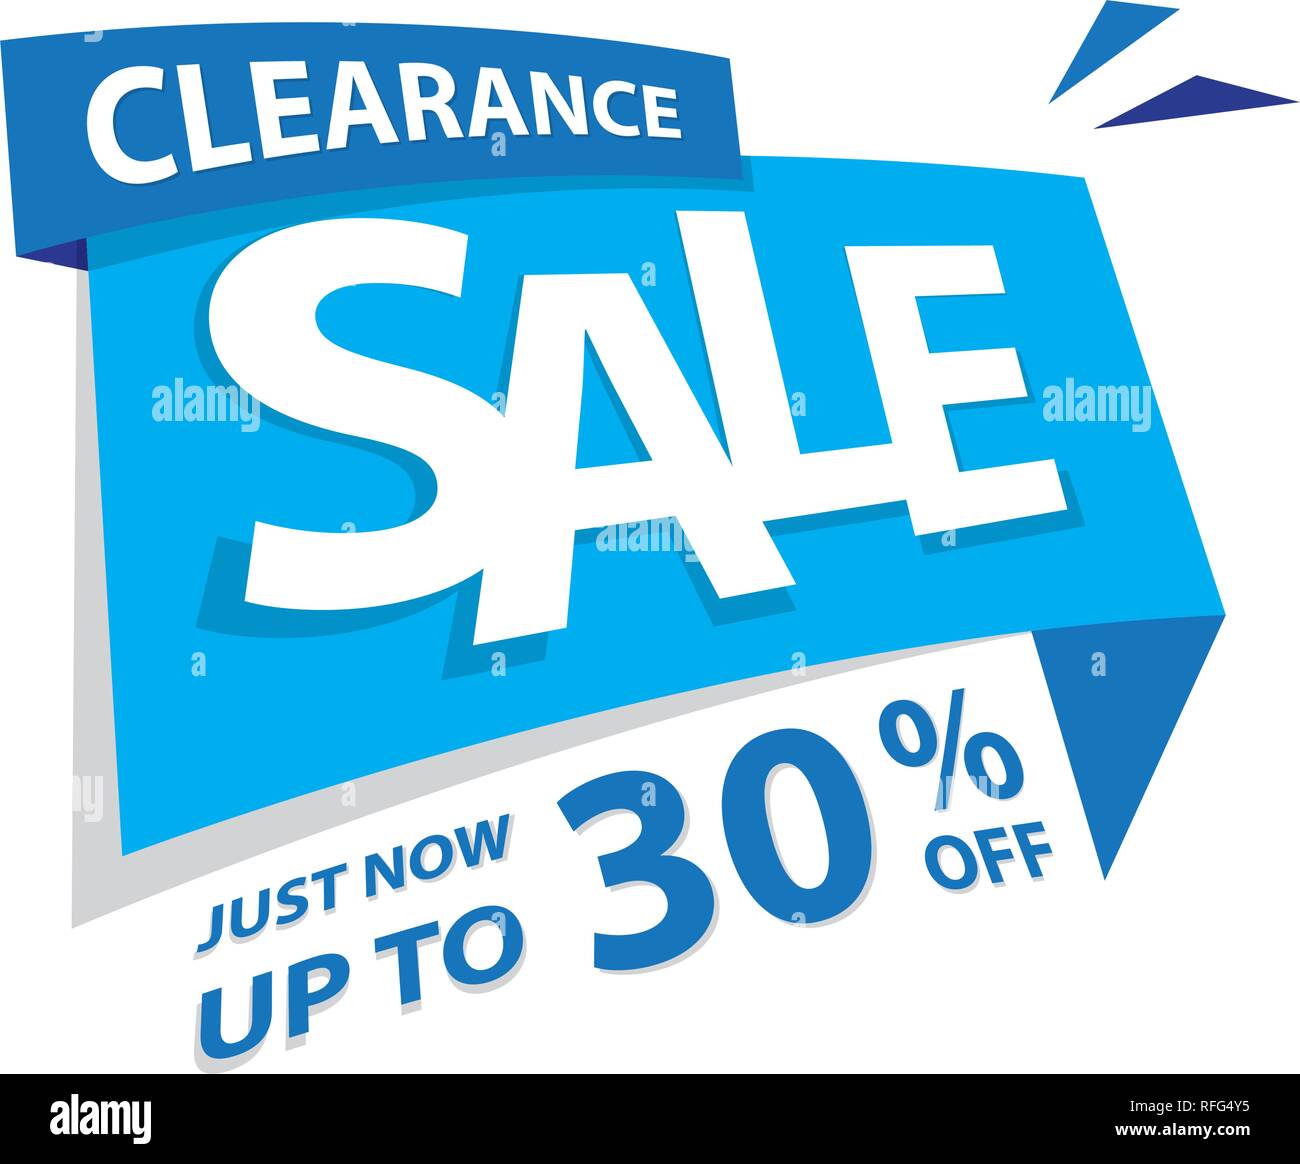 Clearance Sale Meaning Discounts Closeout And Promotional Stock Photo -  Alamy